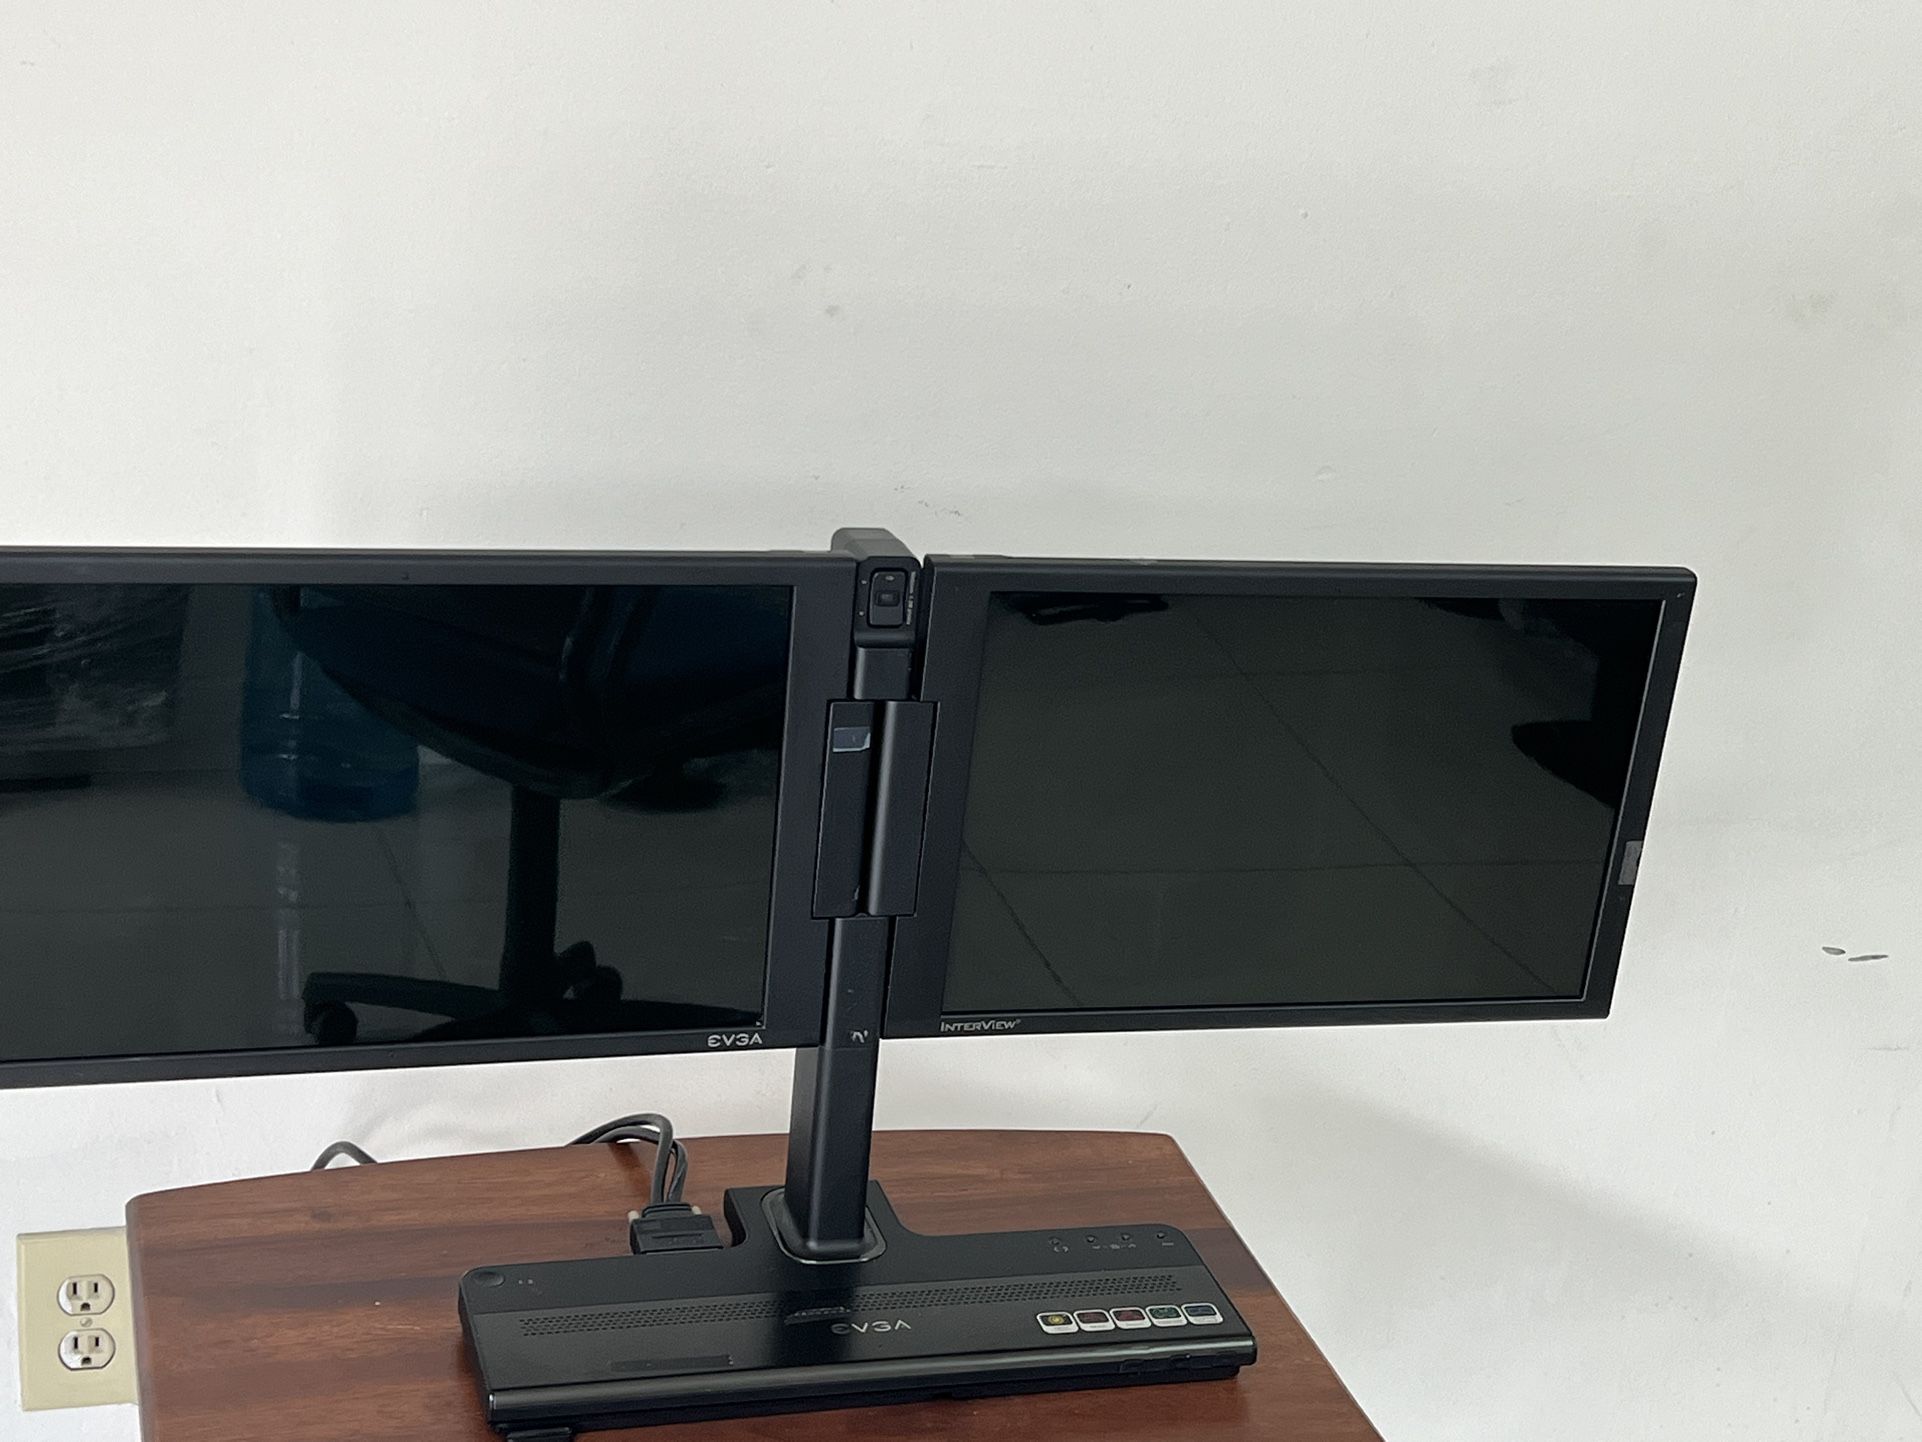 EVGA InterView 1700 17 inch Dual Monitor System $140